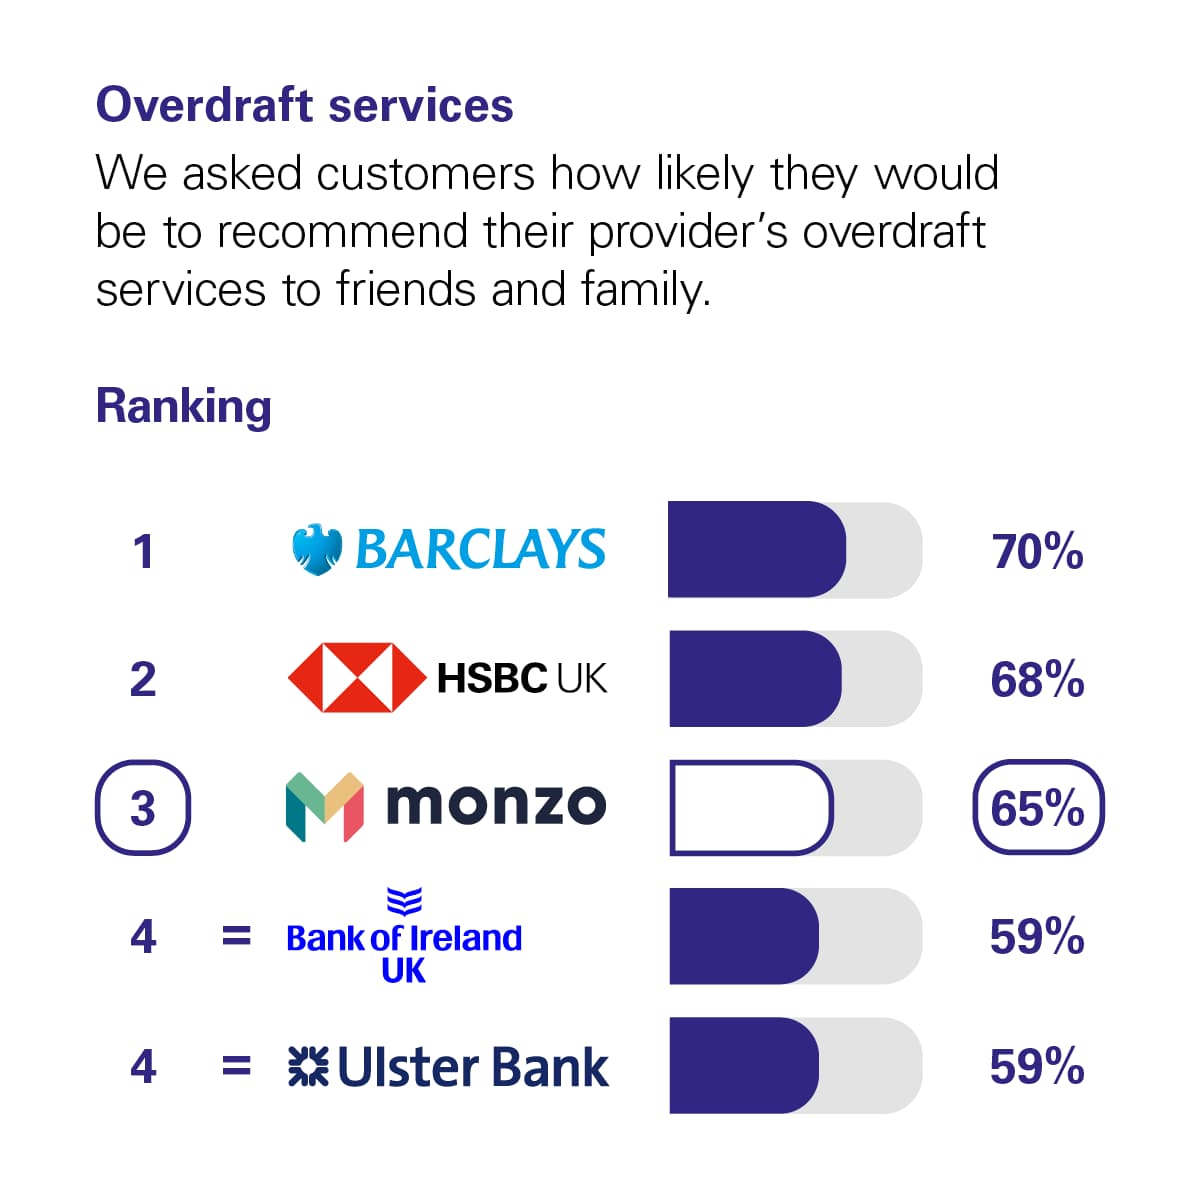 Graph showing the results of the CMA scoring of UK banks in the Overdraft Services category. The CMA asked customers how likely they would be to recommend their provider's overdraft services to friends and family. The rankings with percentage scores are: 1st Barclays with 70%. 2nd HSBC UK with 68%. 3rd Monzo with 65%. Joint 4th are Bank of Ireland UK and Ulster Bank with 59%.